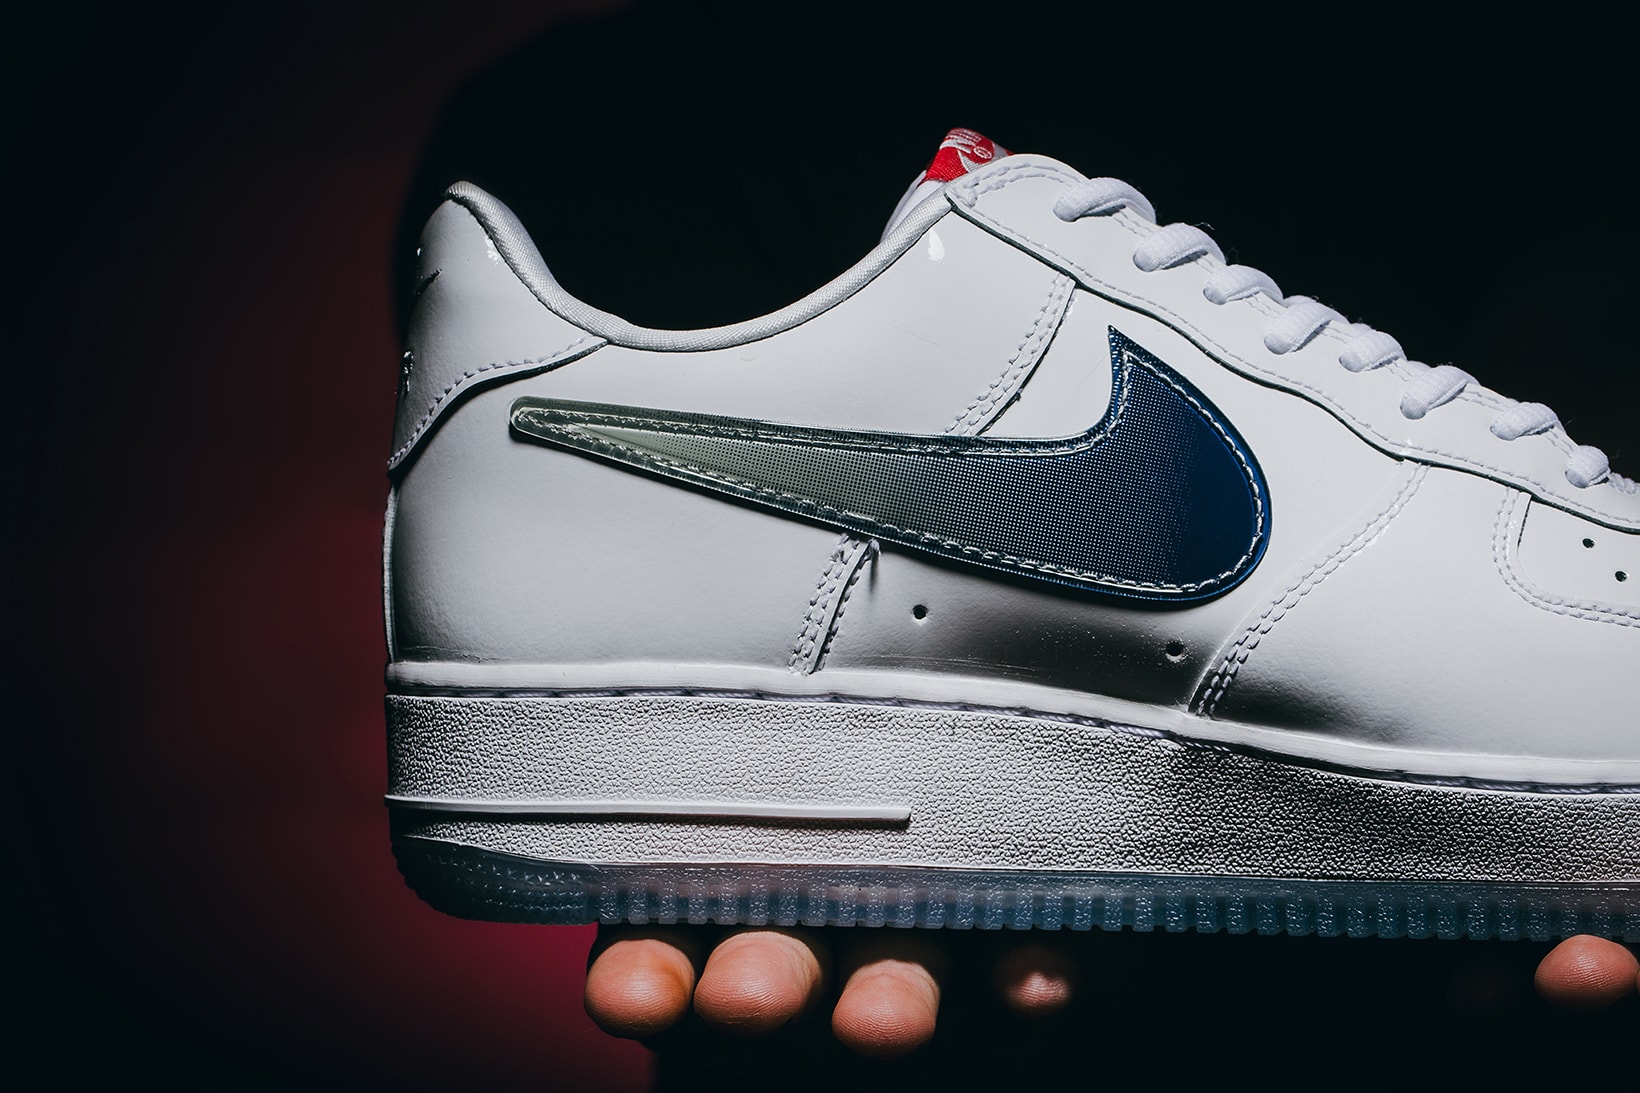 Nike Air Force 1 Low Taiwan 2018 Retro release date info drop sneakers shoes footwear invincible march 17 2018